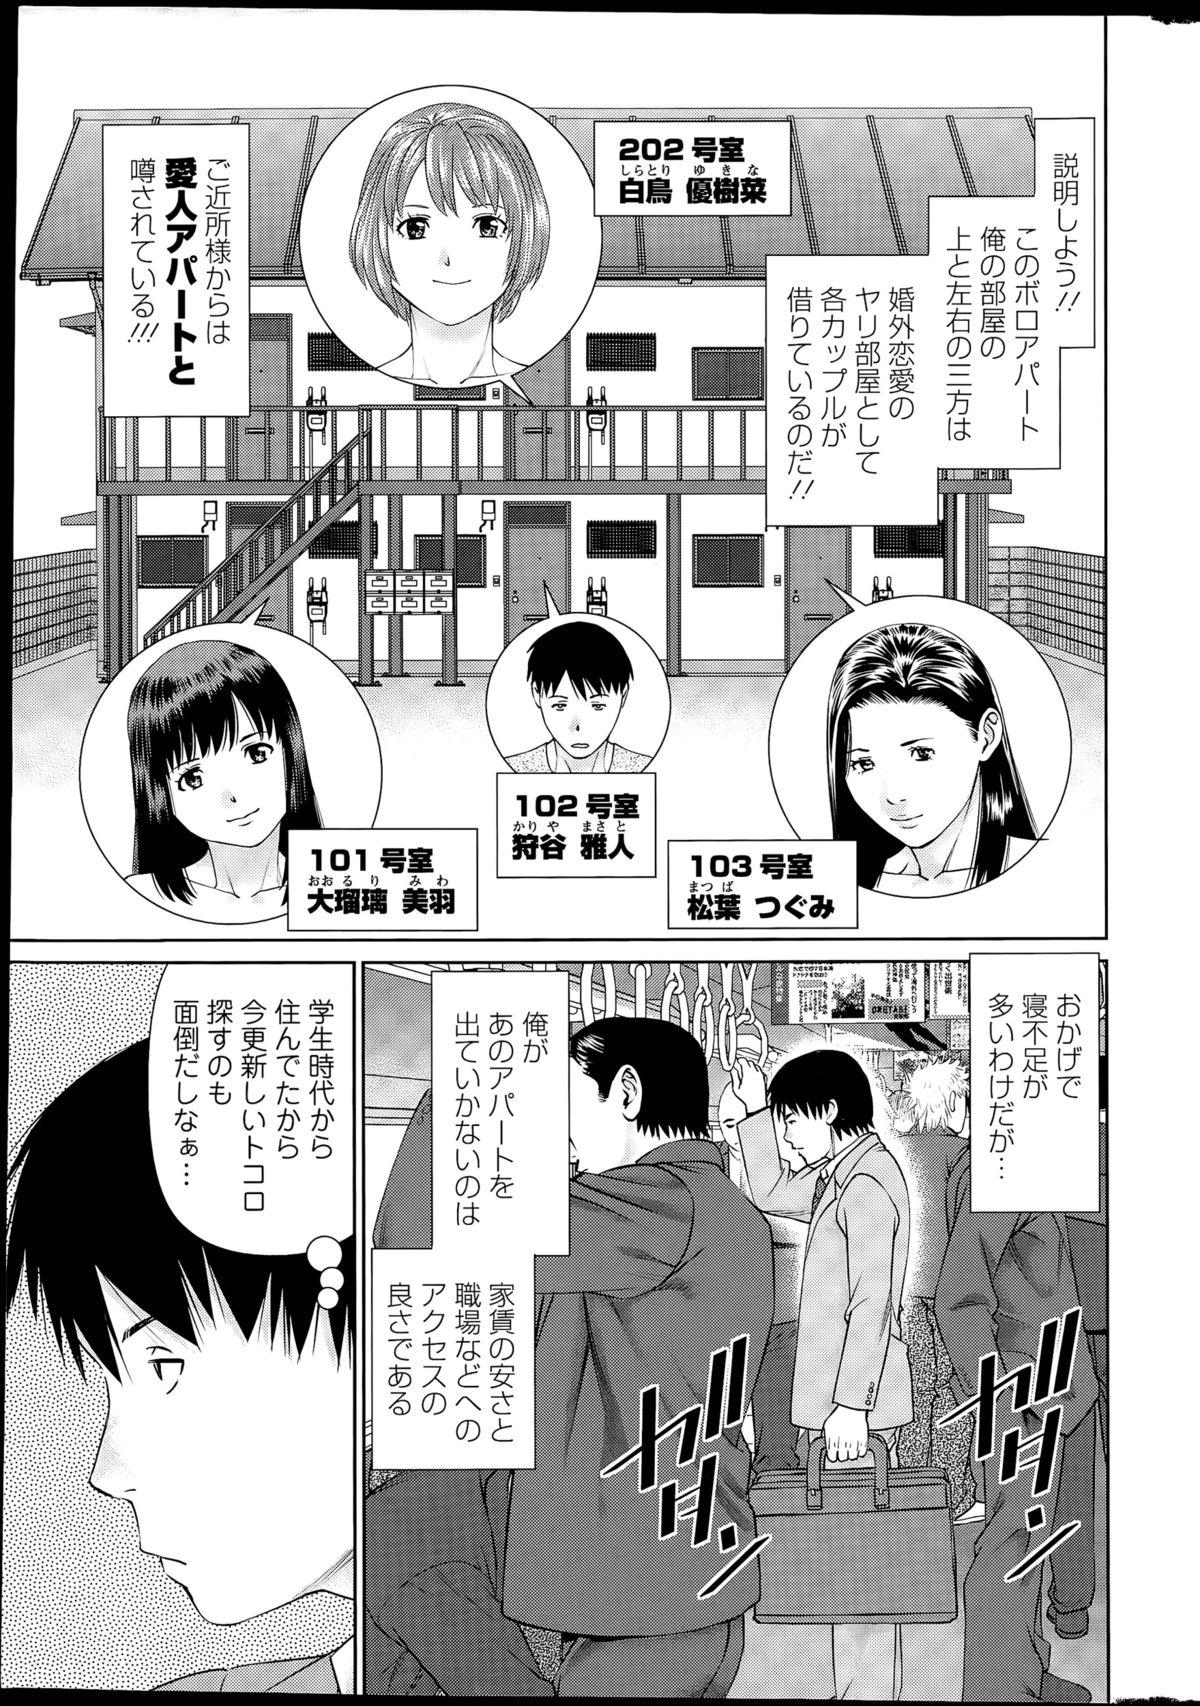 Wank [Usi] Aijin Apart - Lover's Apartment Ch. 1-4 Pussyfucking - Page 7